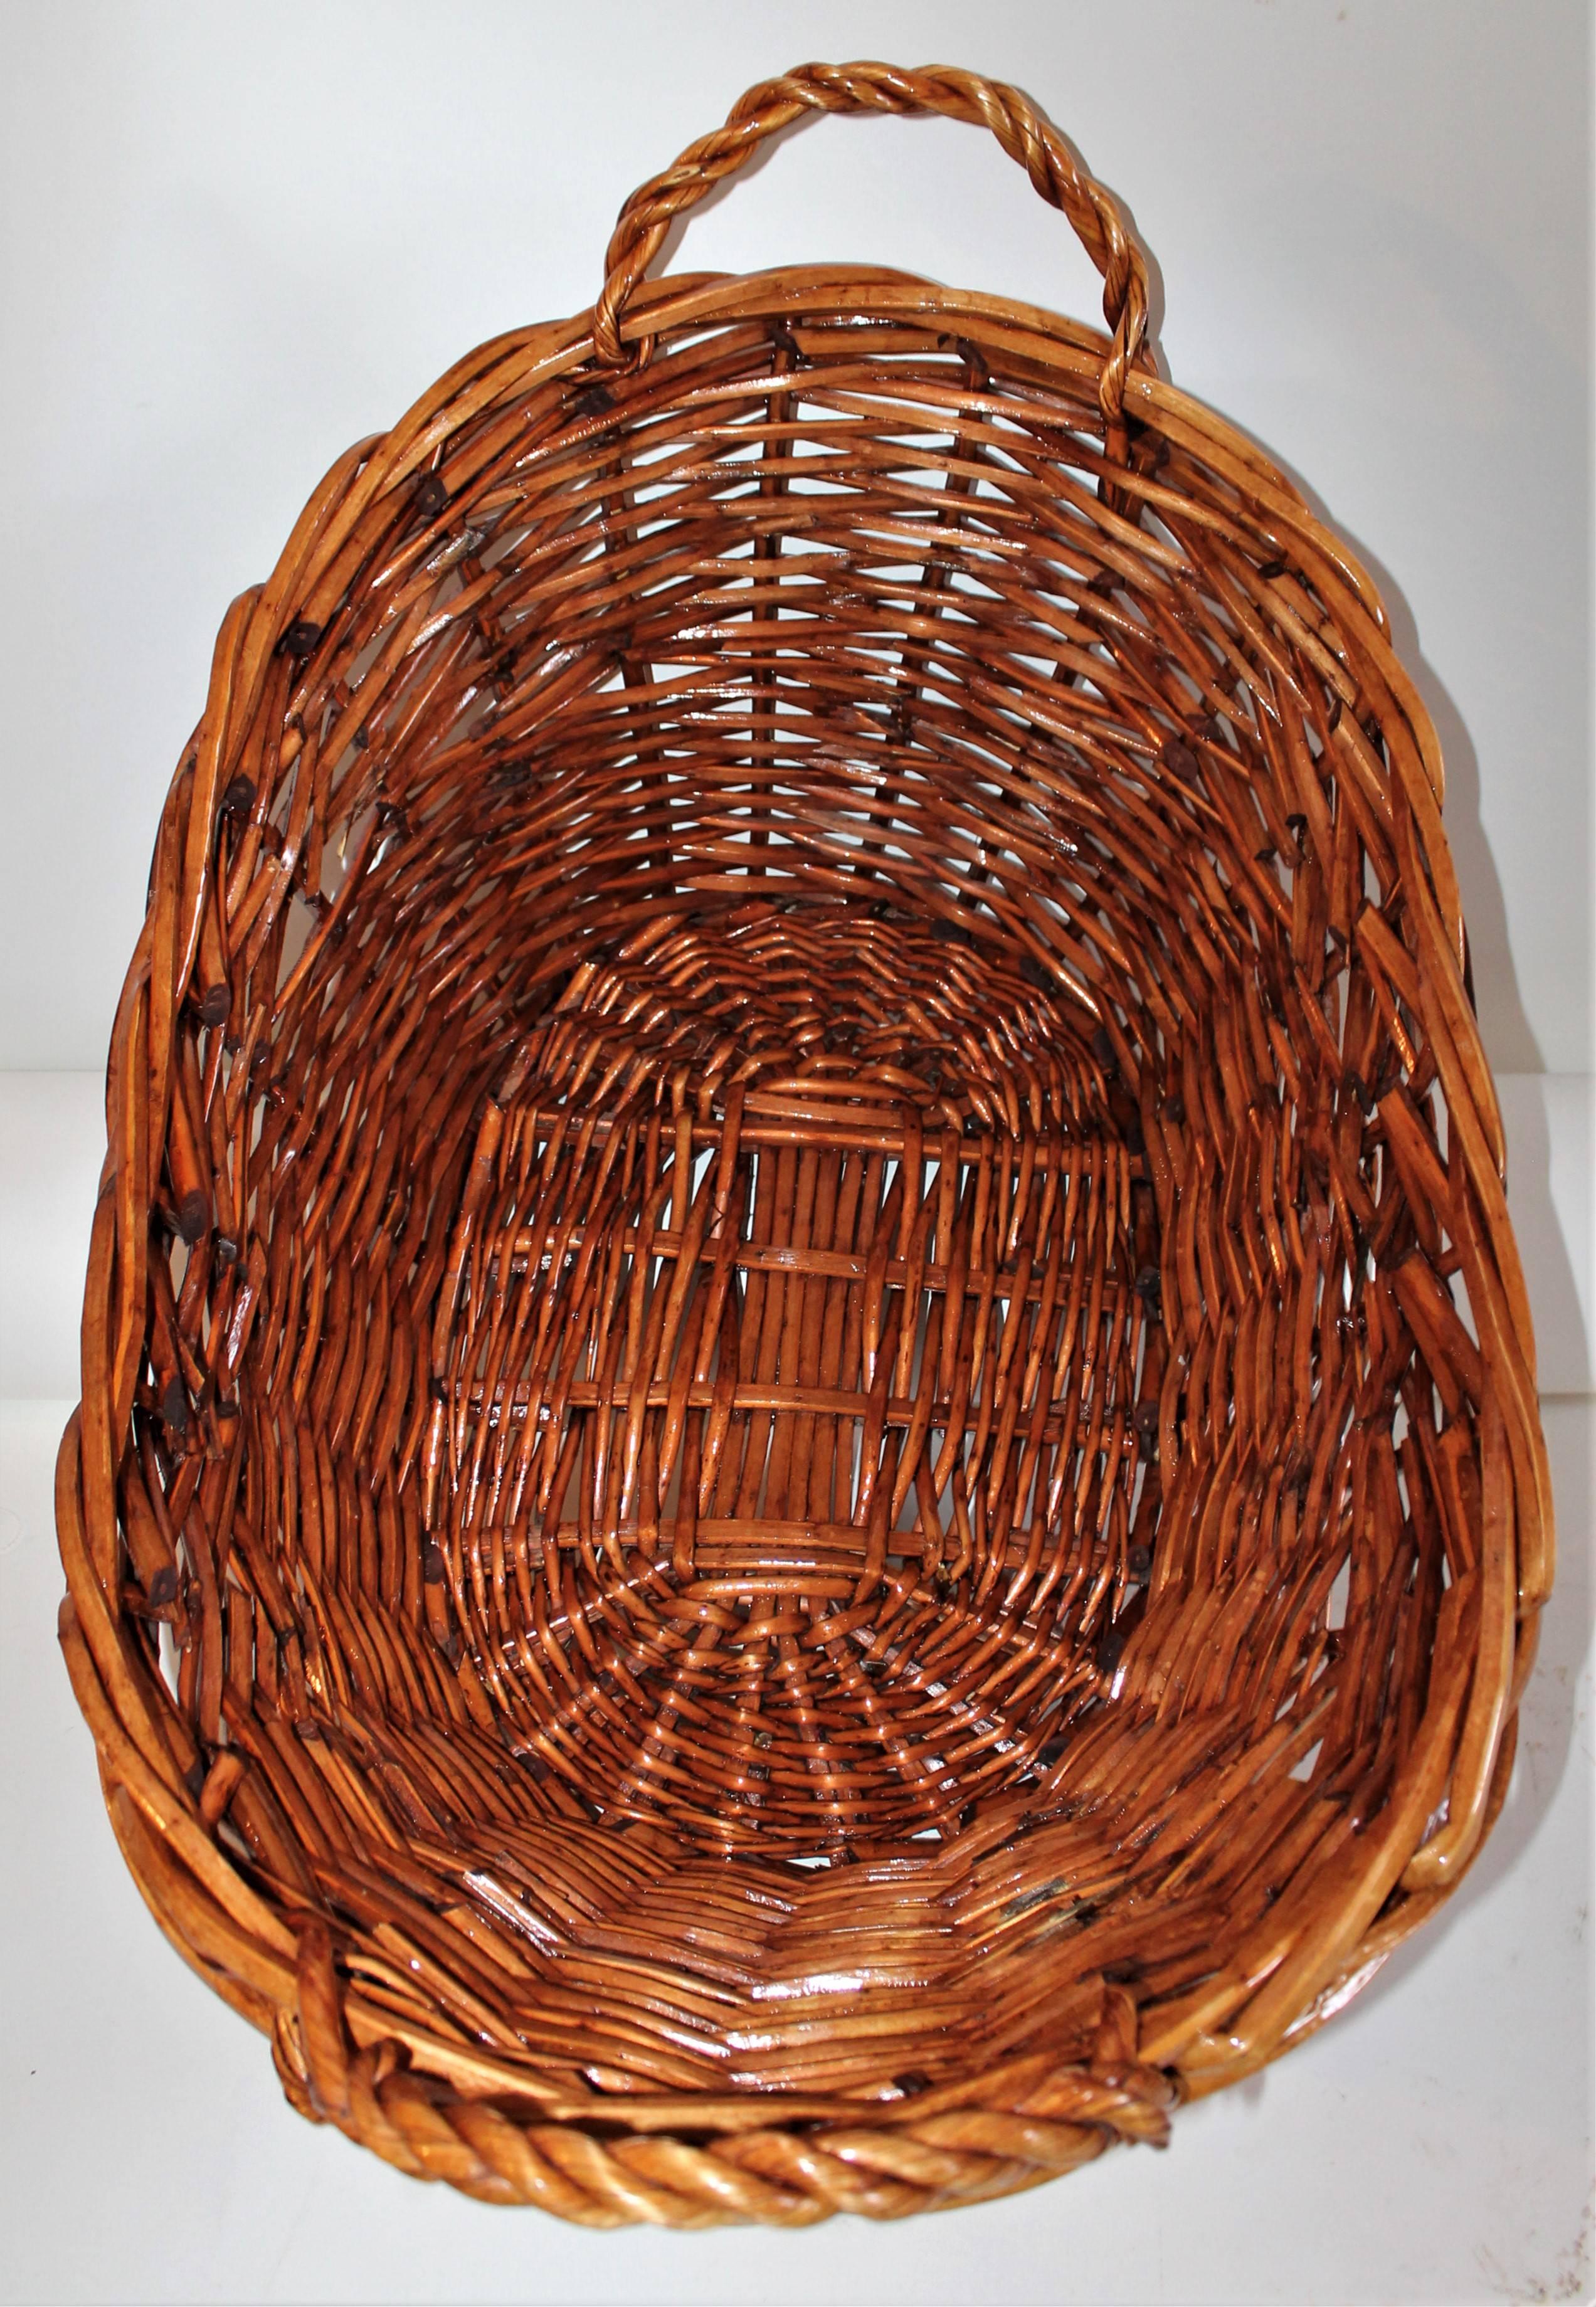 Varnished 19th Century Willow Laundry Basket with Double Handles